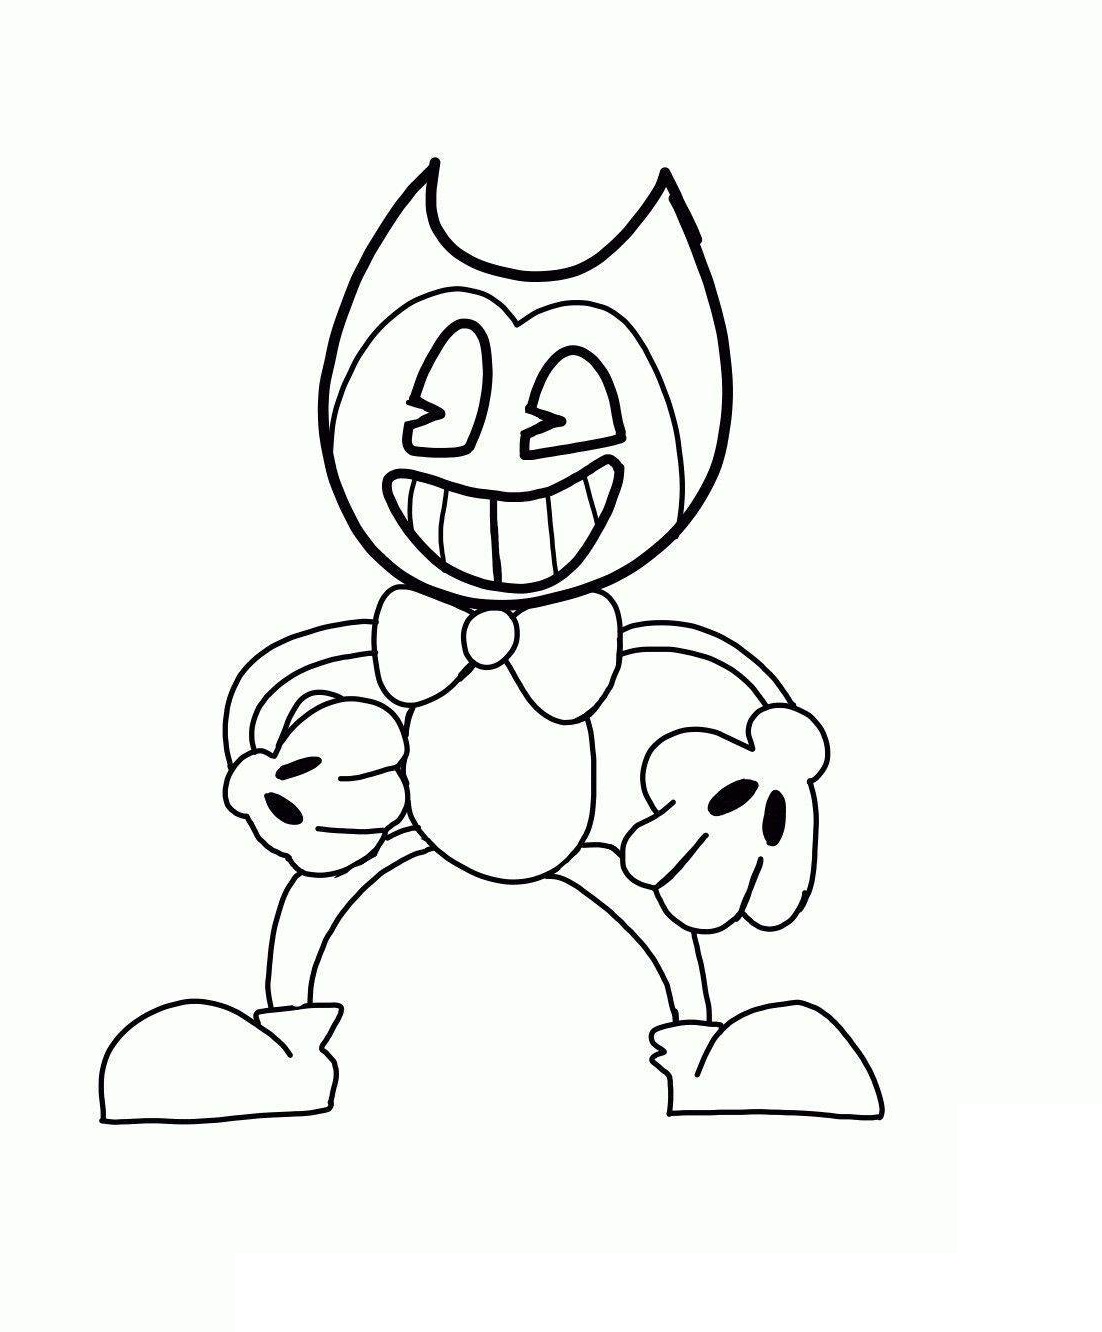 Funny Bendy Coloring Page Free Printable Coloring Pages for Kids